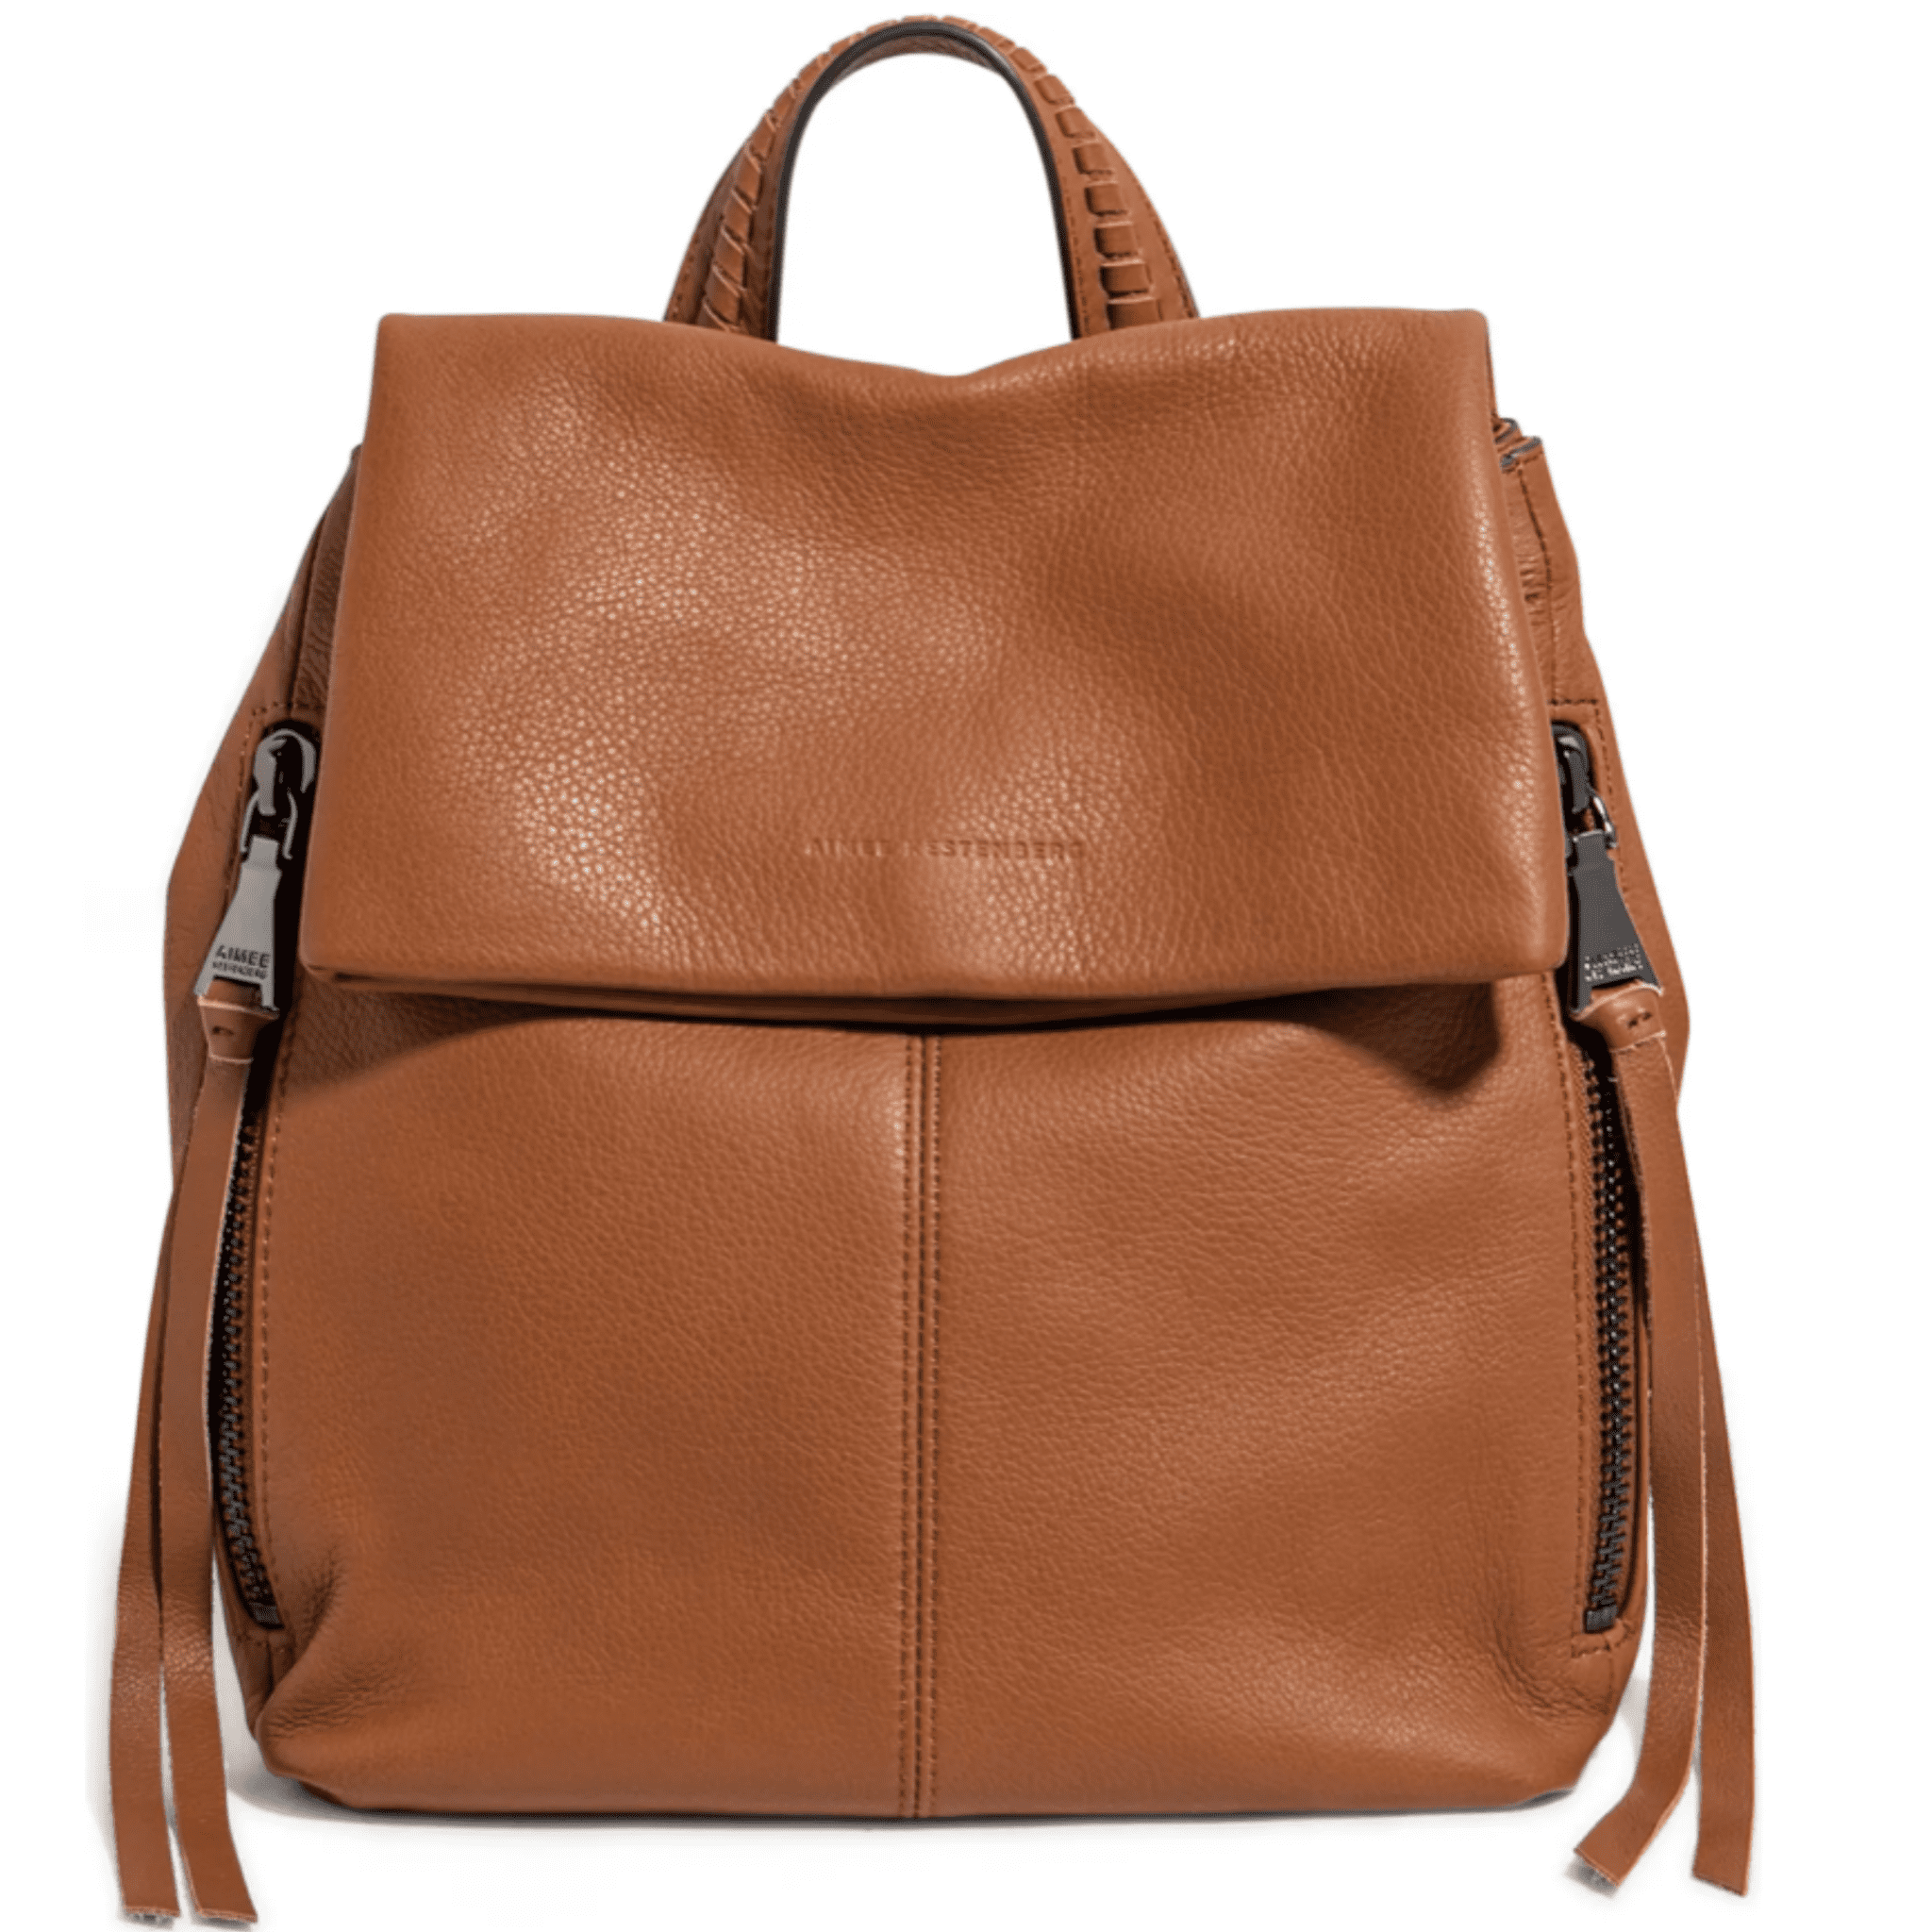 Brown backpack with two side pockets